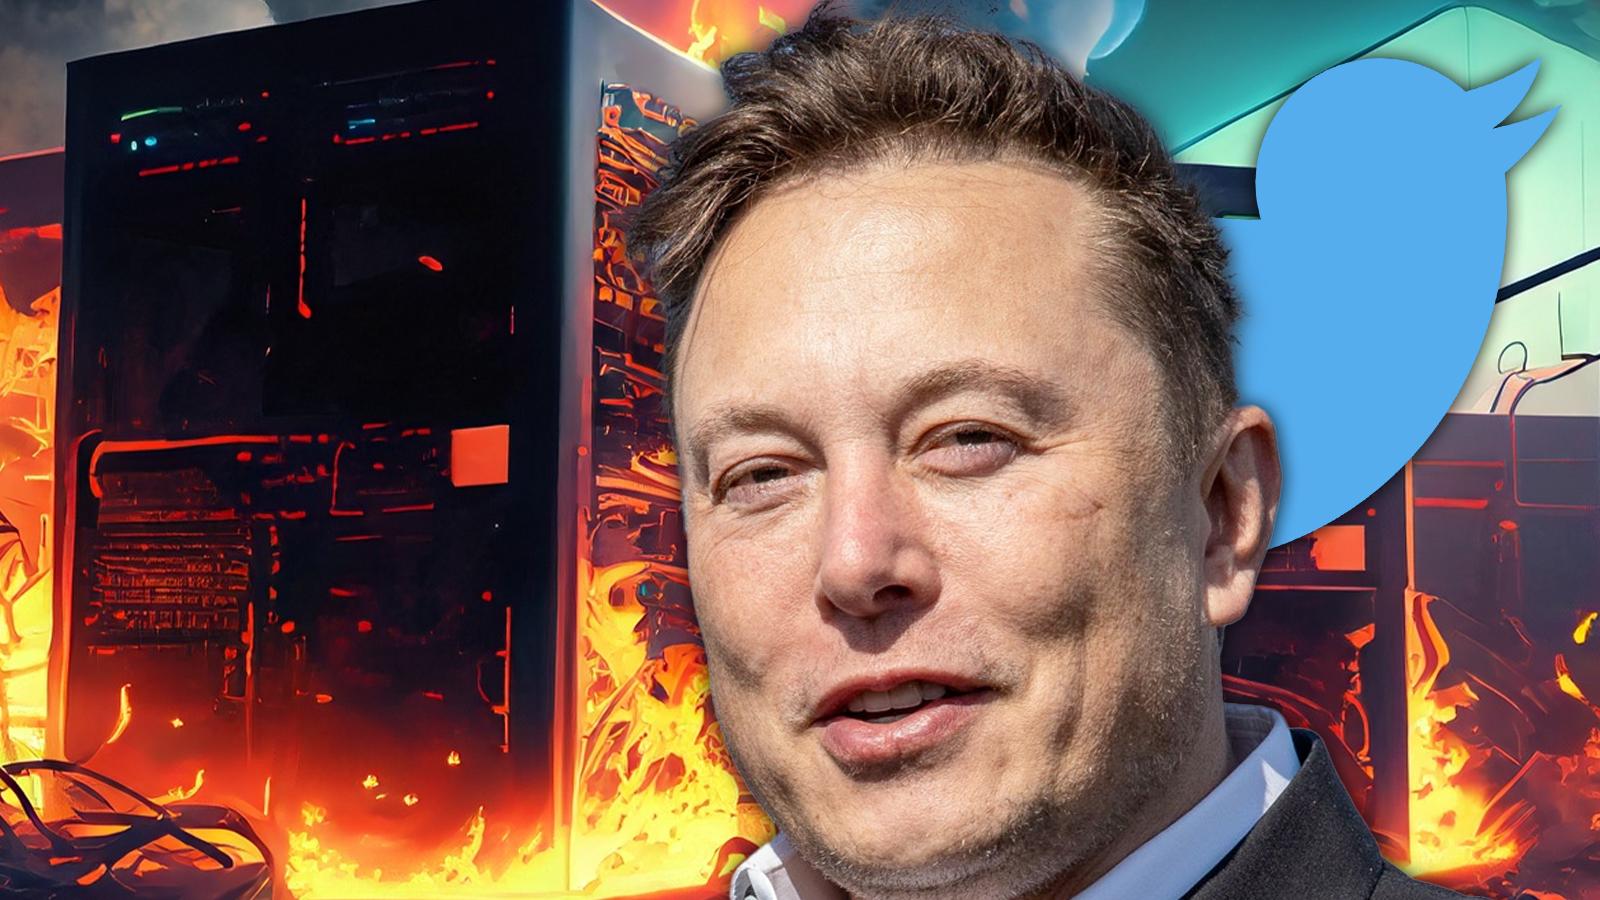 elon musk in front of an ai generated image of a server room on fire, with the twitter logo in the background